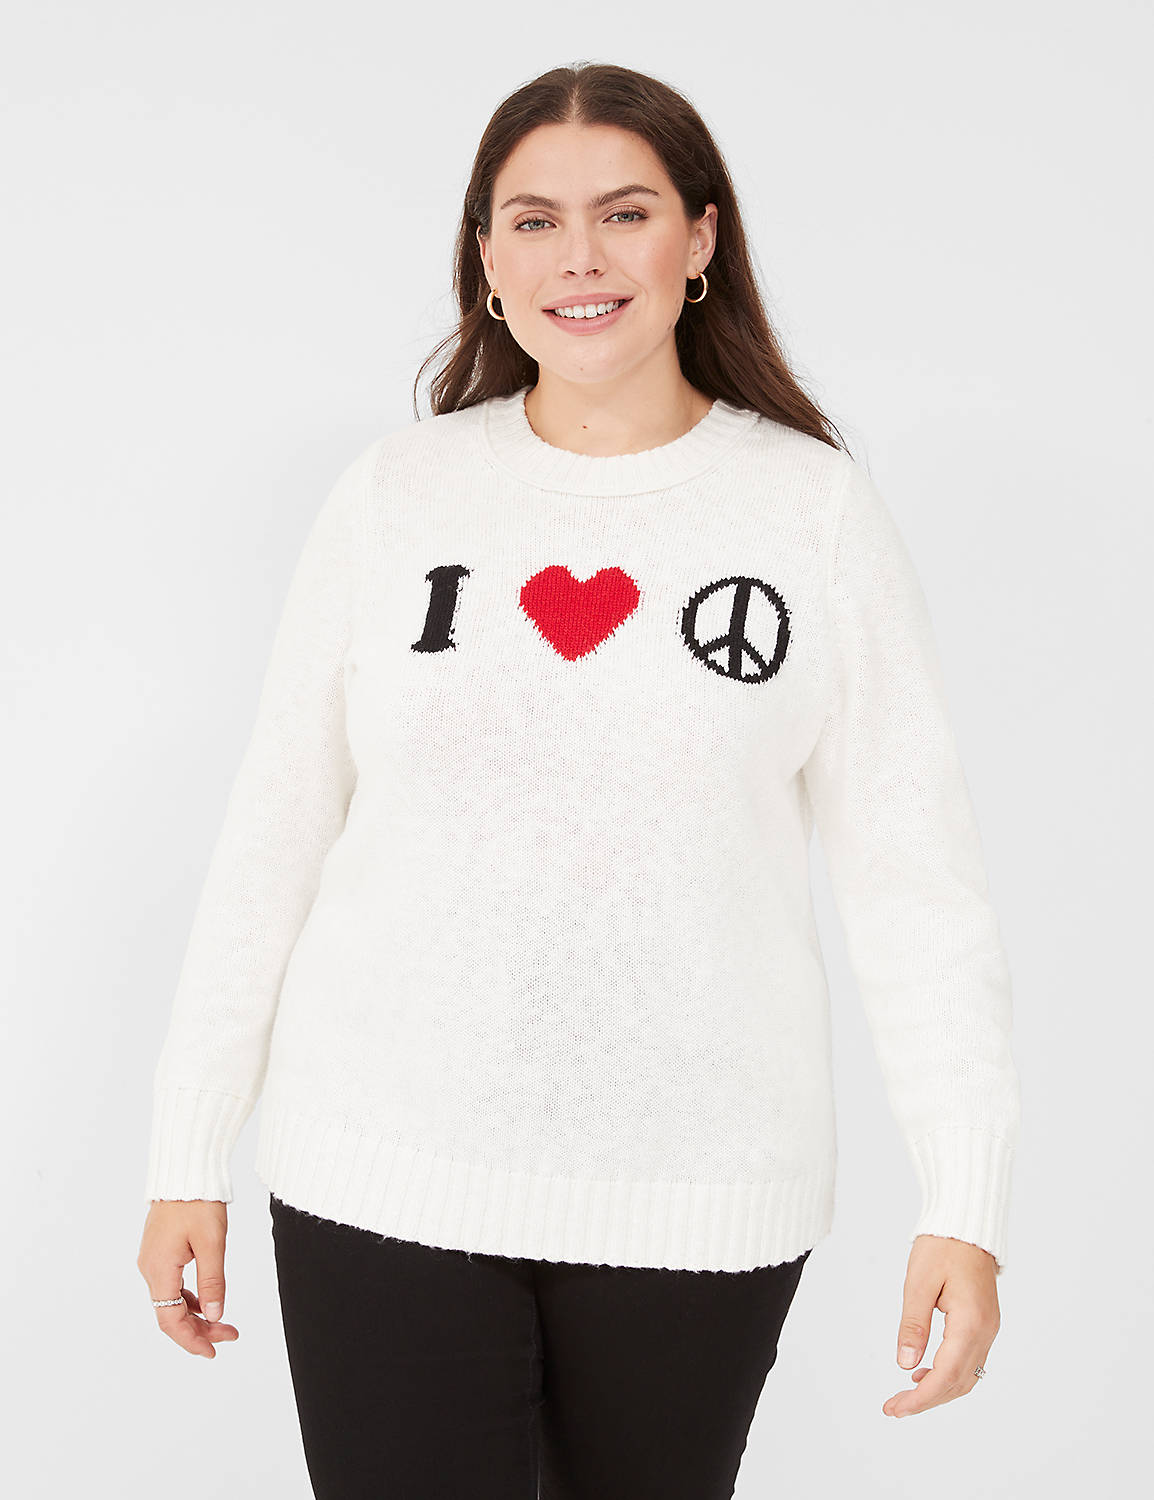 Classic Long Sleeve Crew Neck Peace Product Image 1